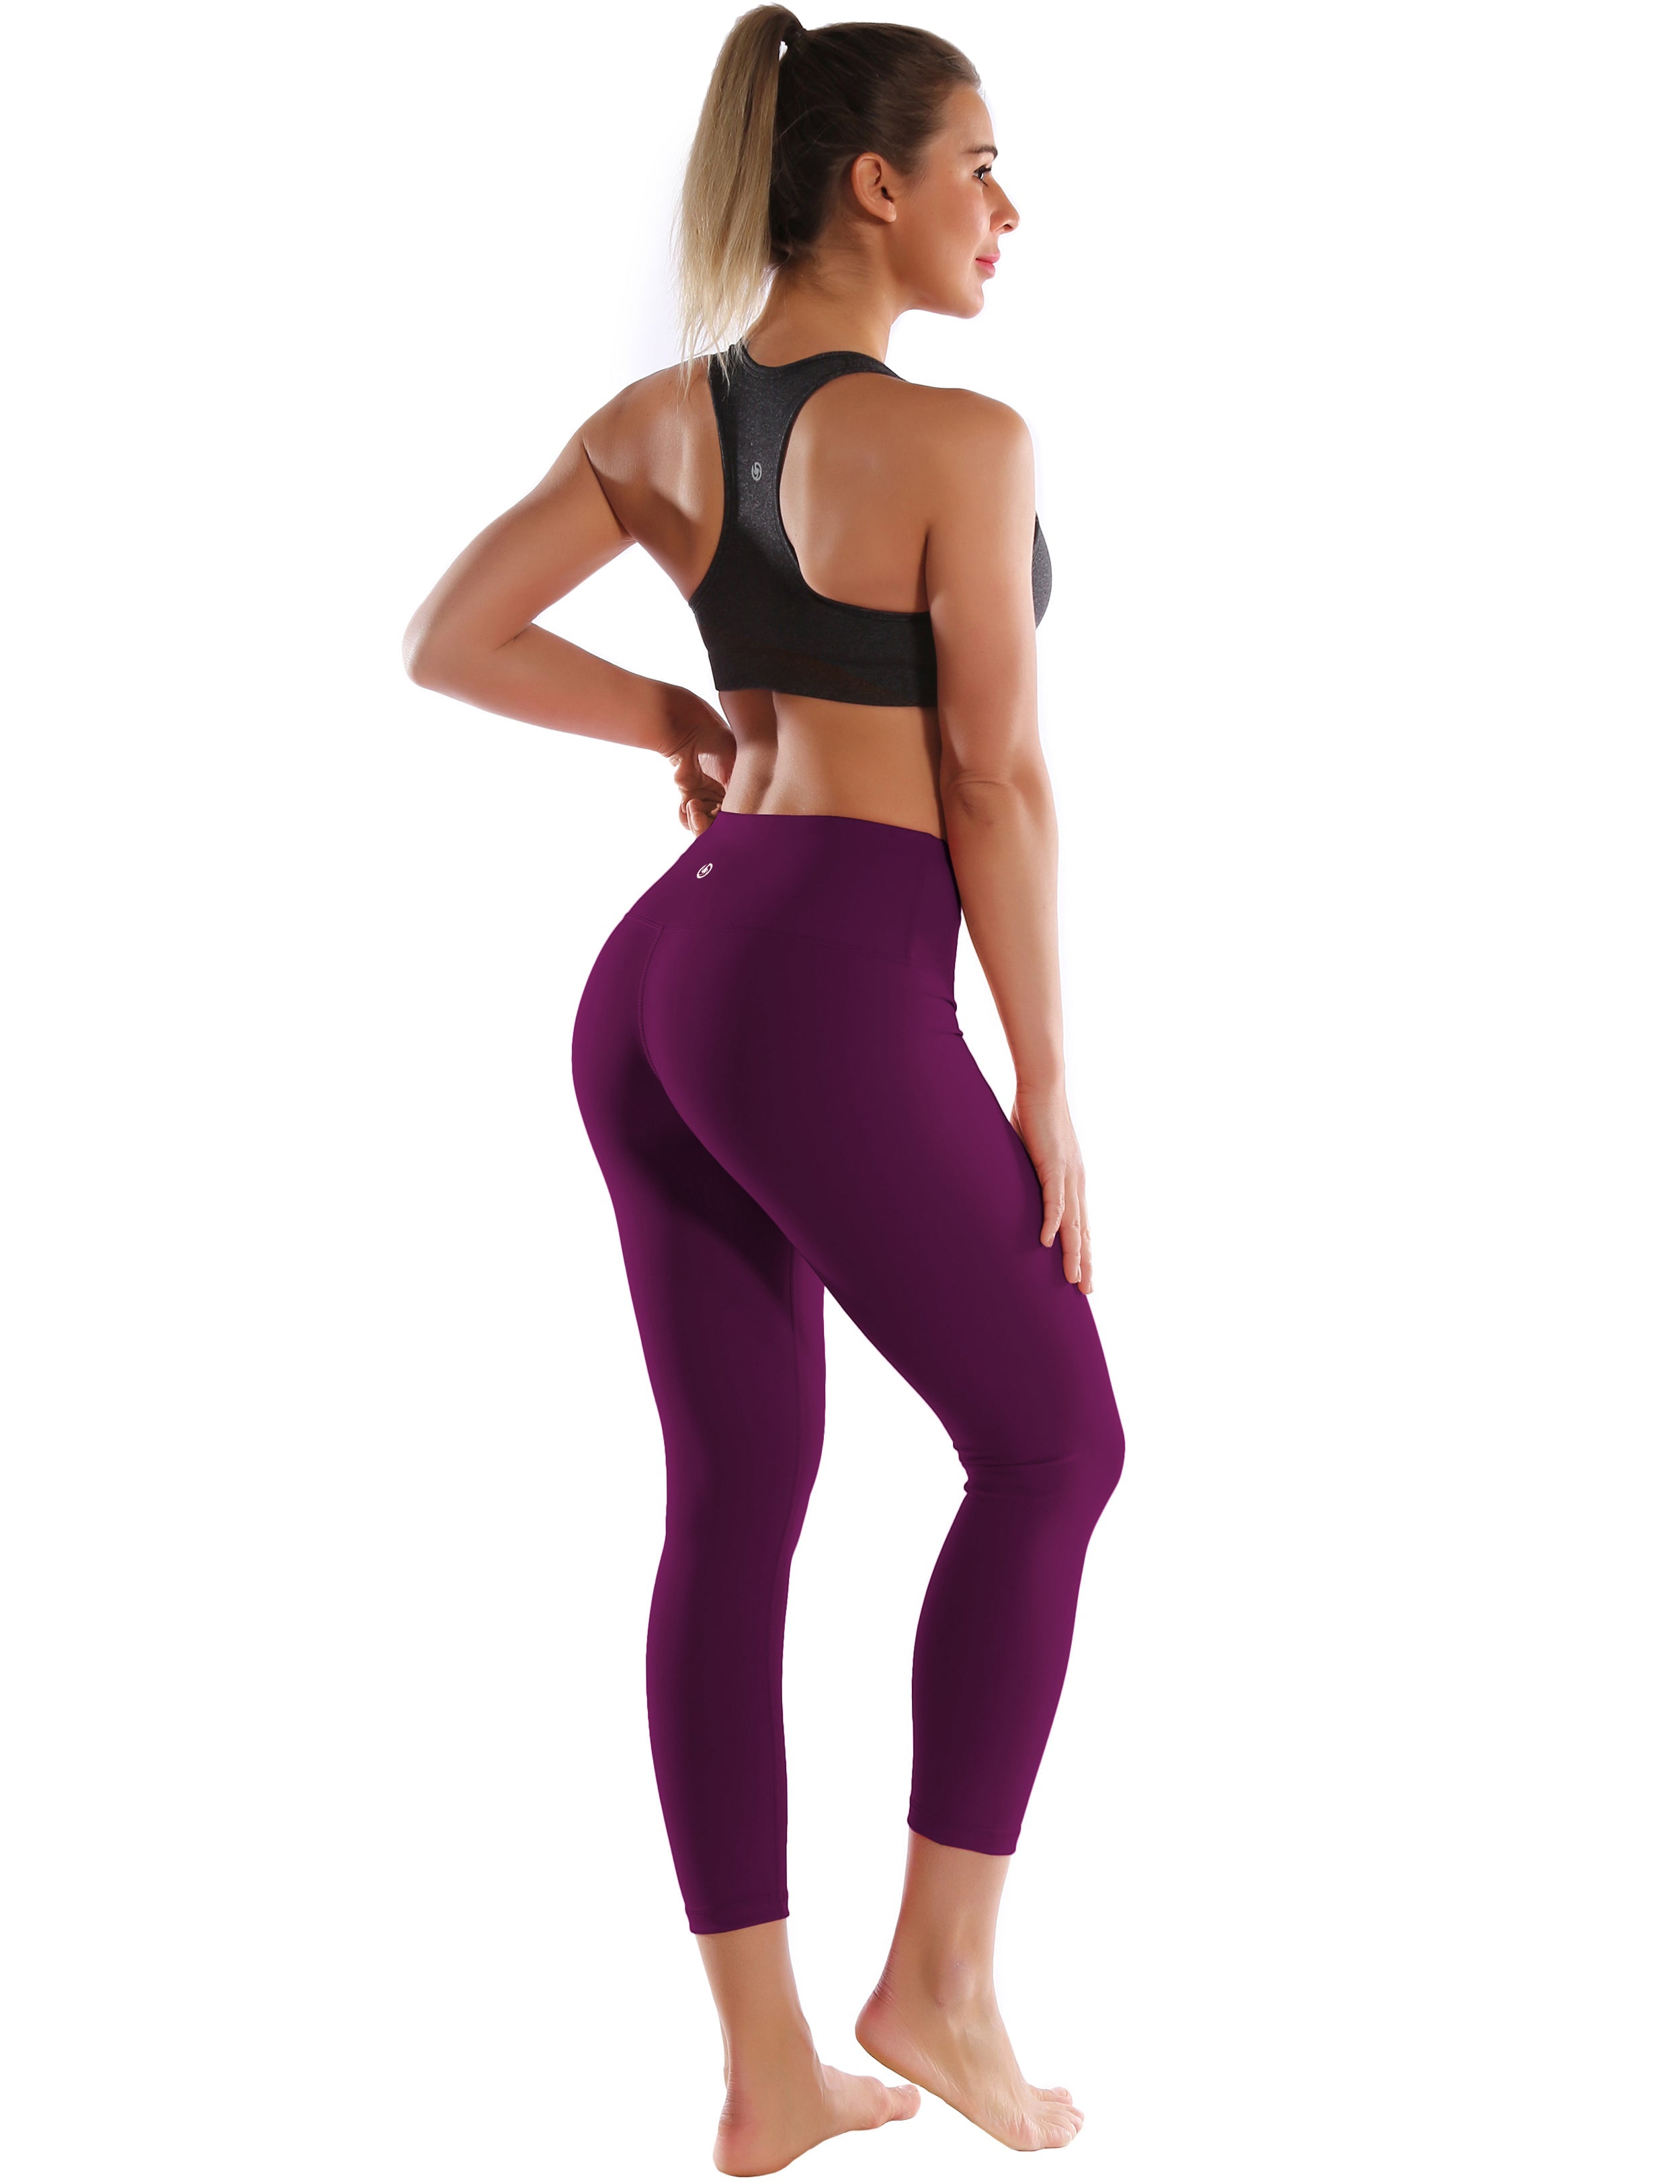 22" High Waist Crop Tight Capris plum 75%Nylon/25%Spandex Fabric doesn't attract lint easily 4-way stretch No see-through Moisture-wicking Tummy control Inner pocket